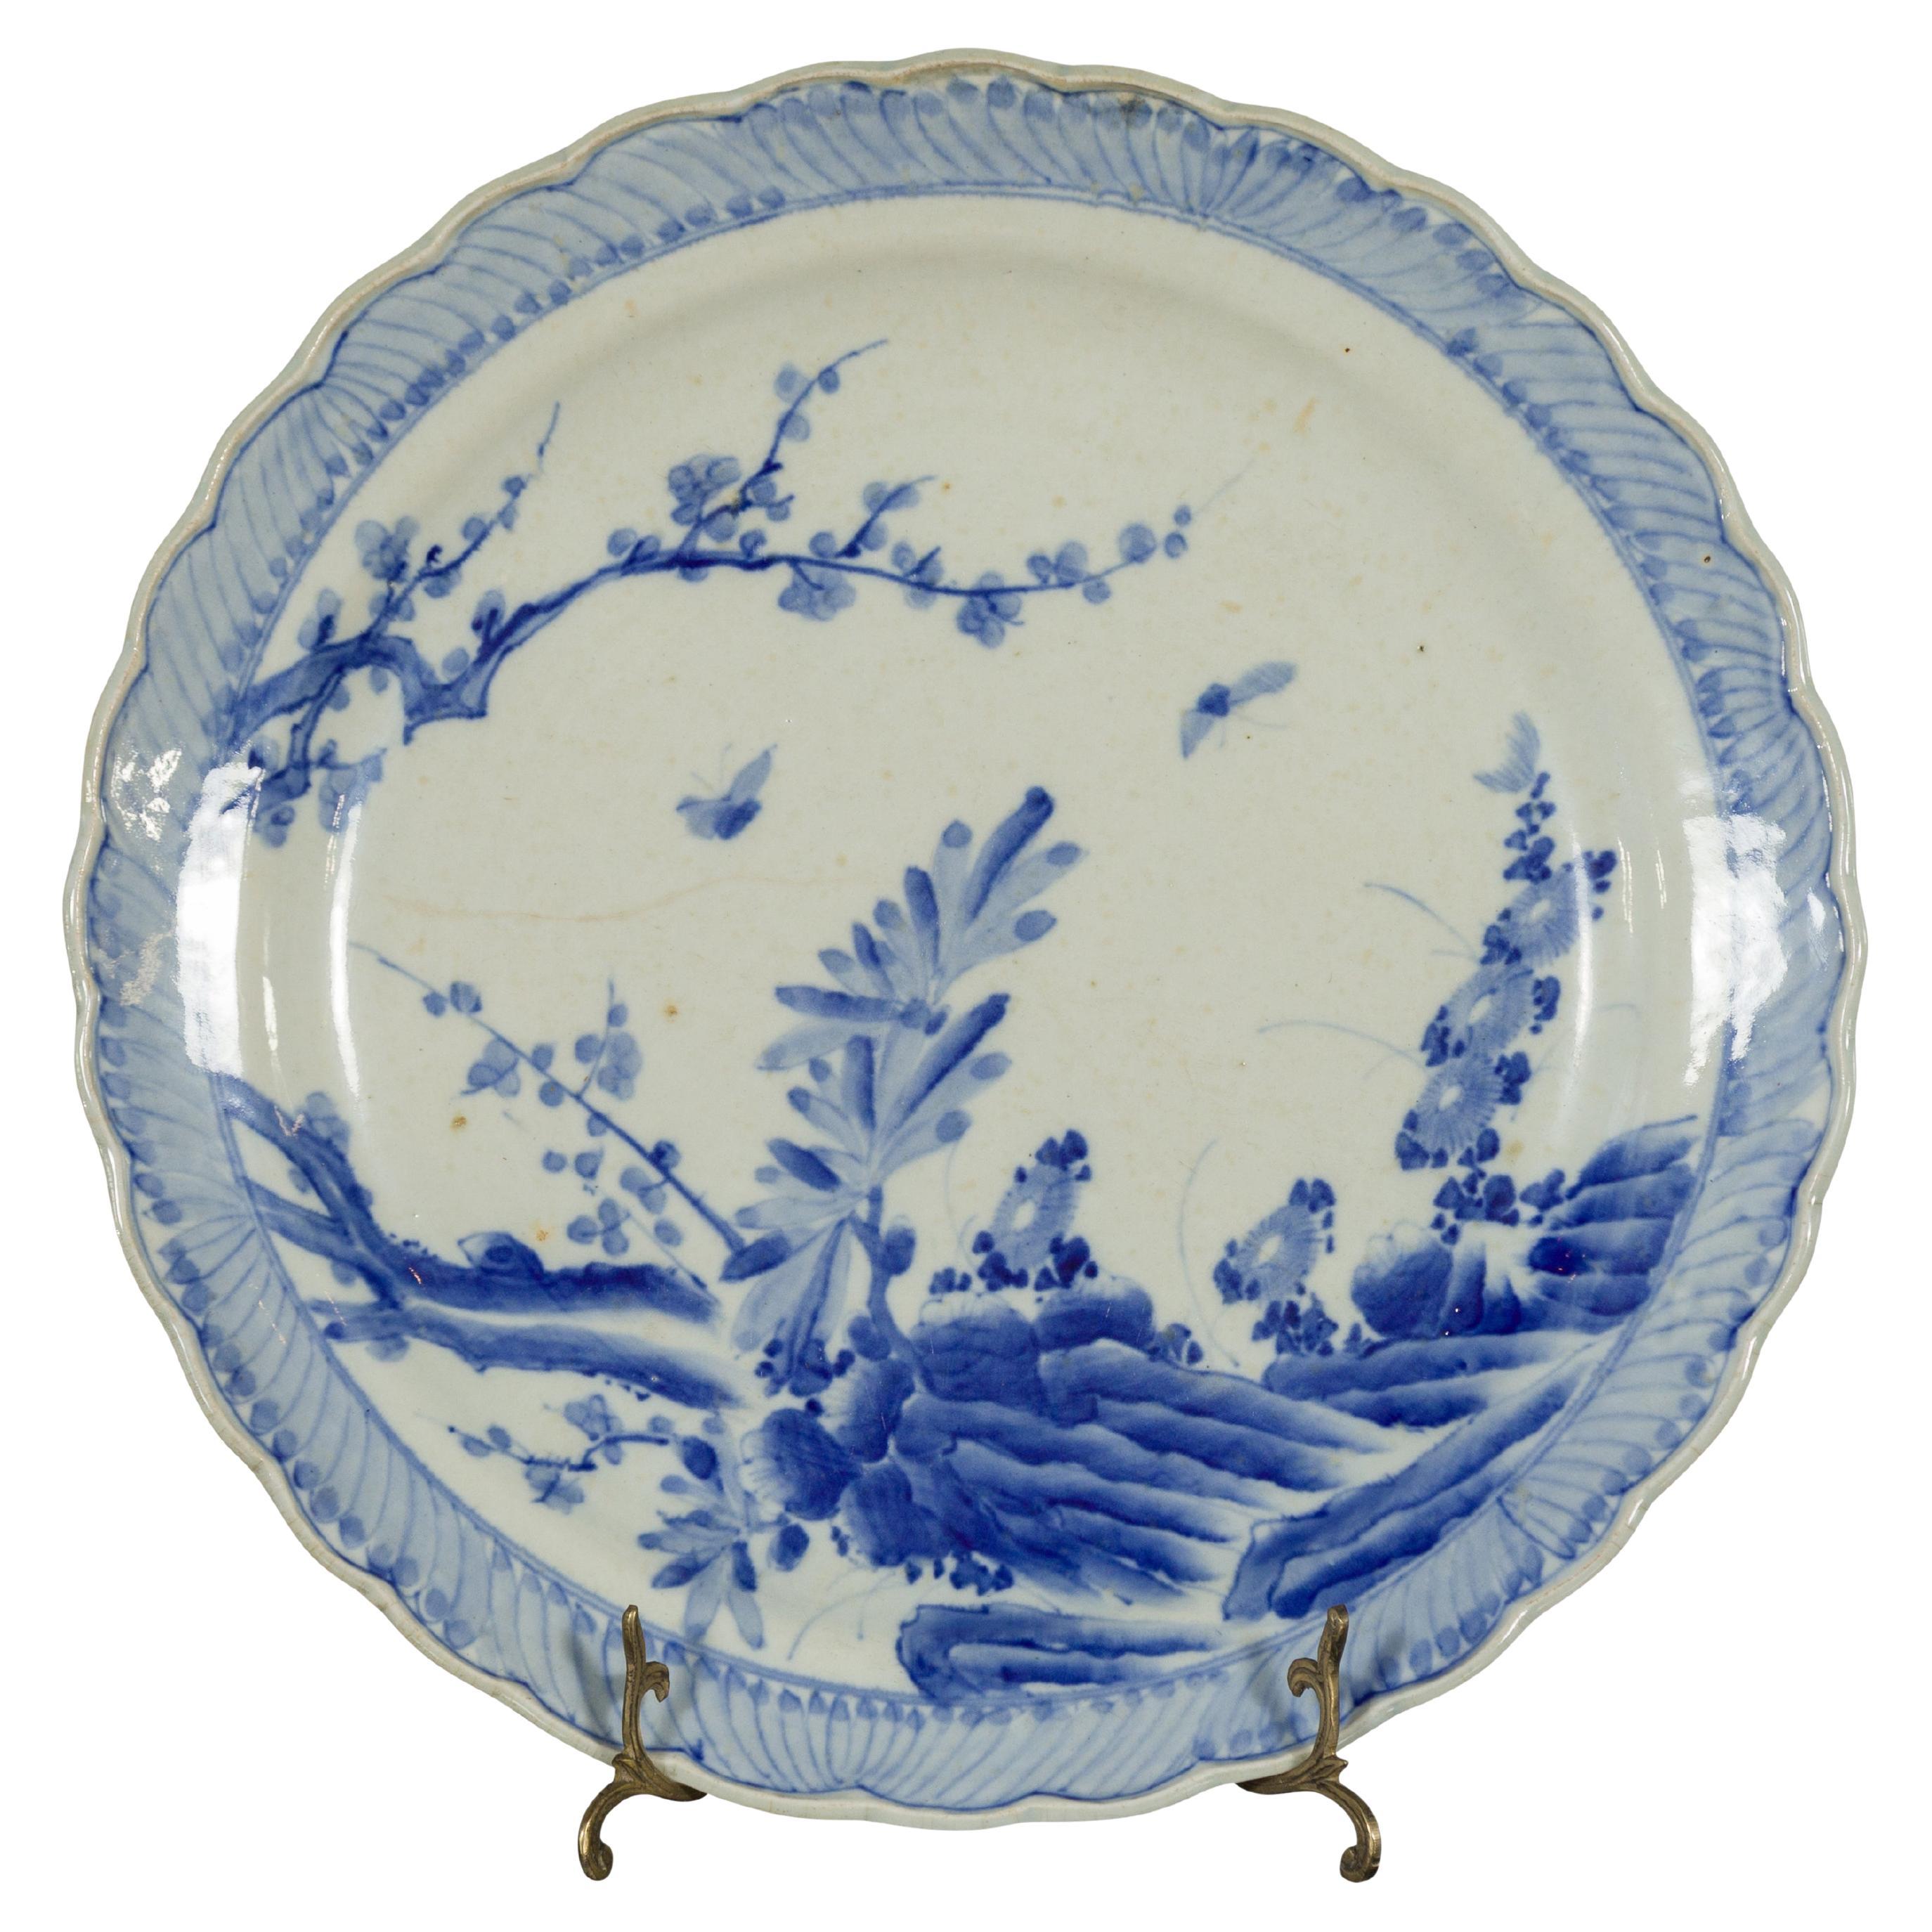 Japanese Blue and White Hand-Painted Porcelain Charger Plate with Foliage Décor